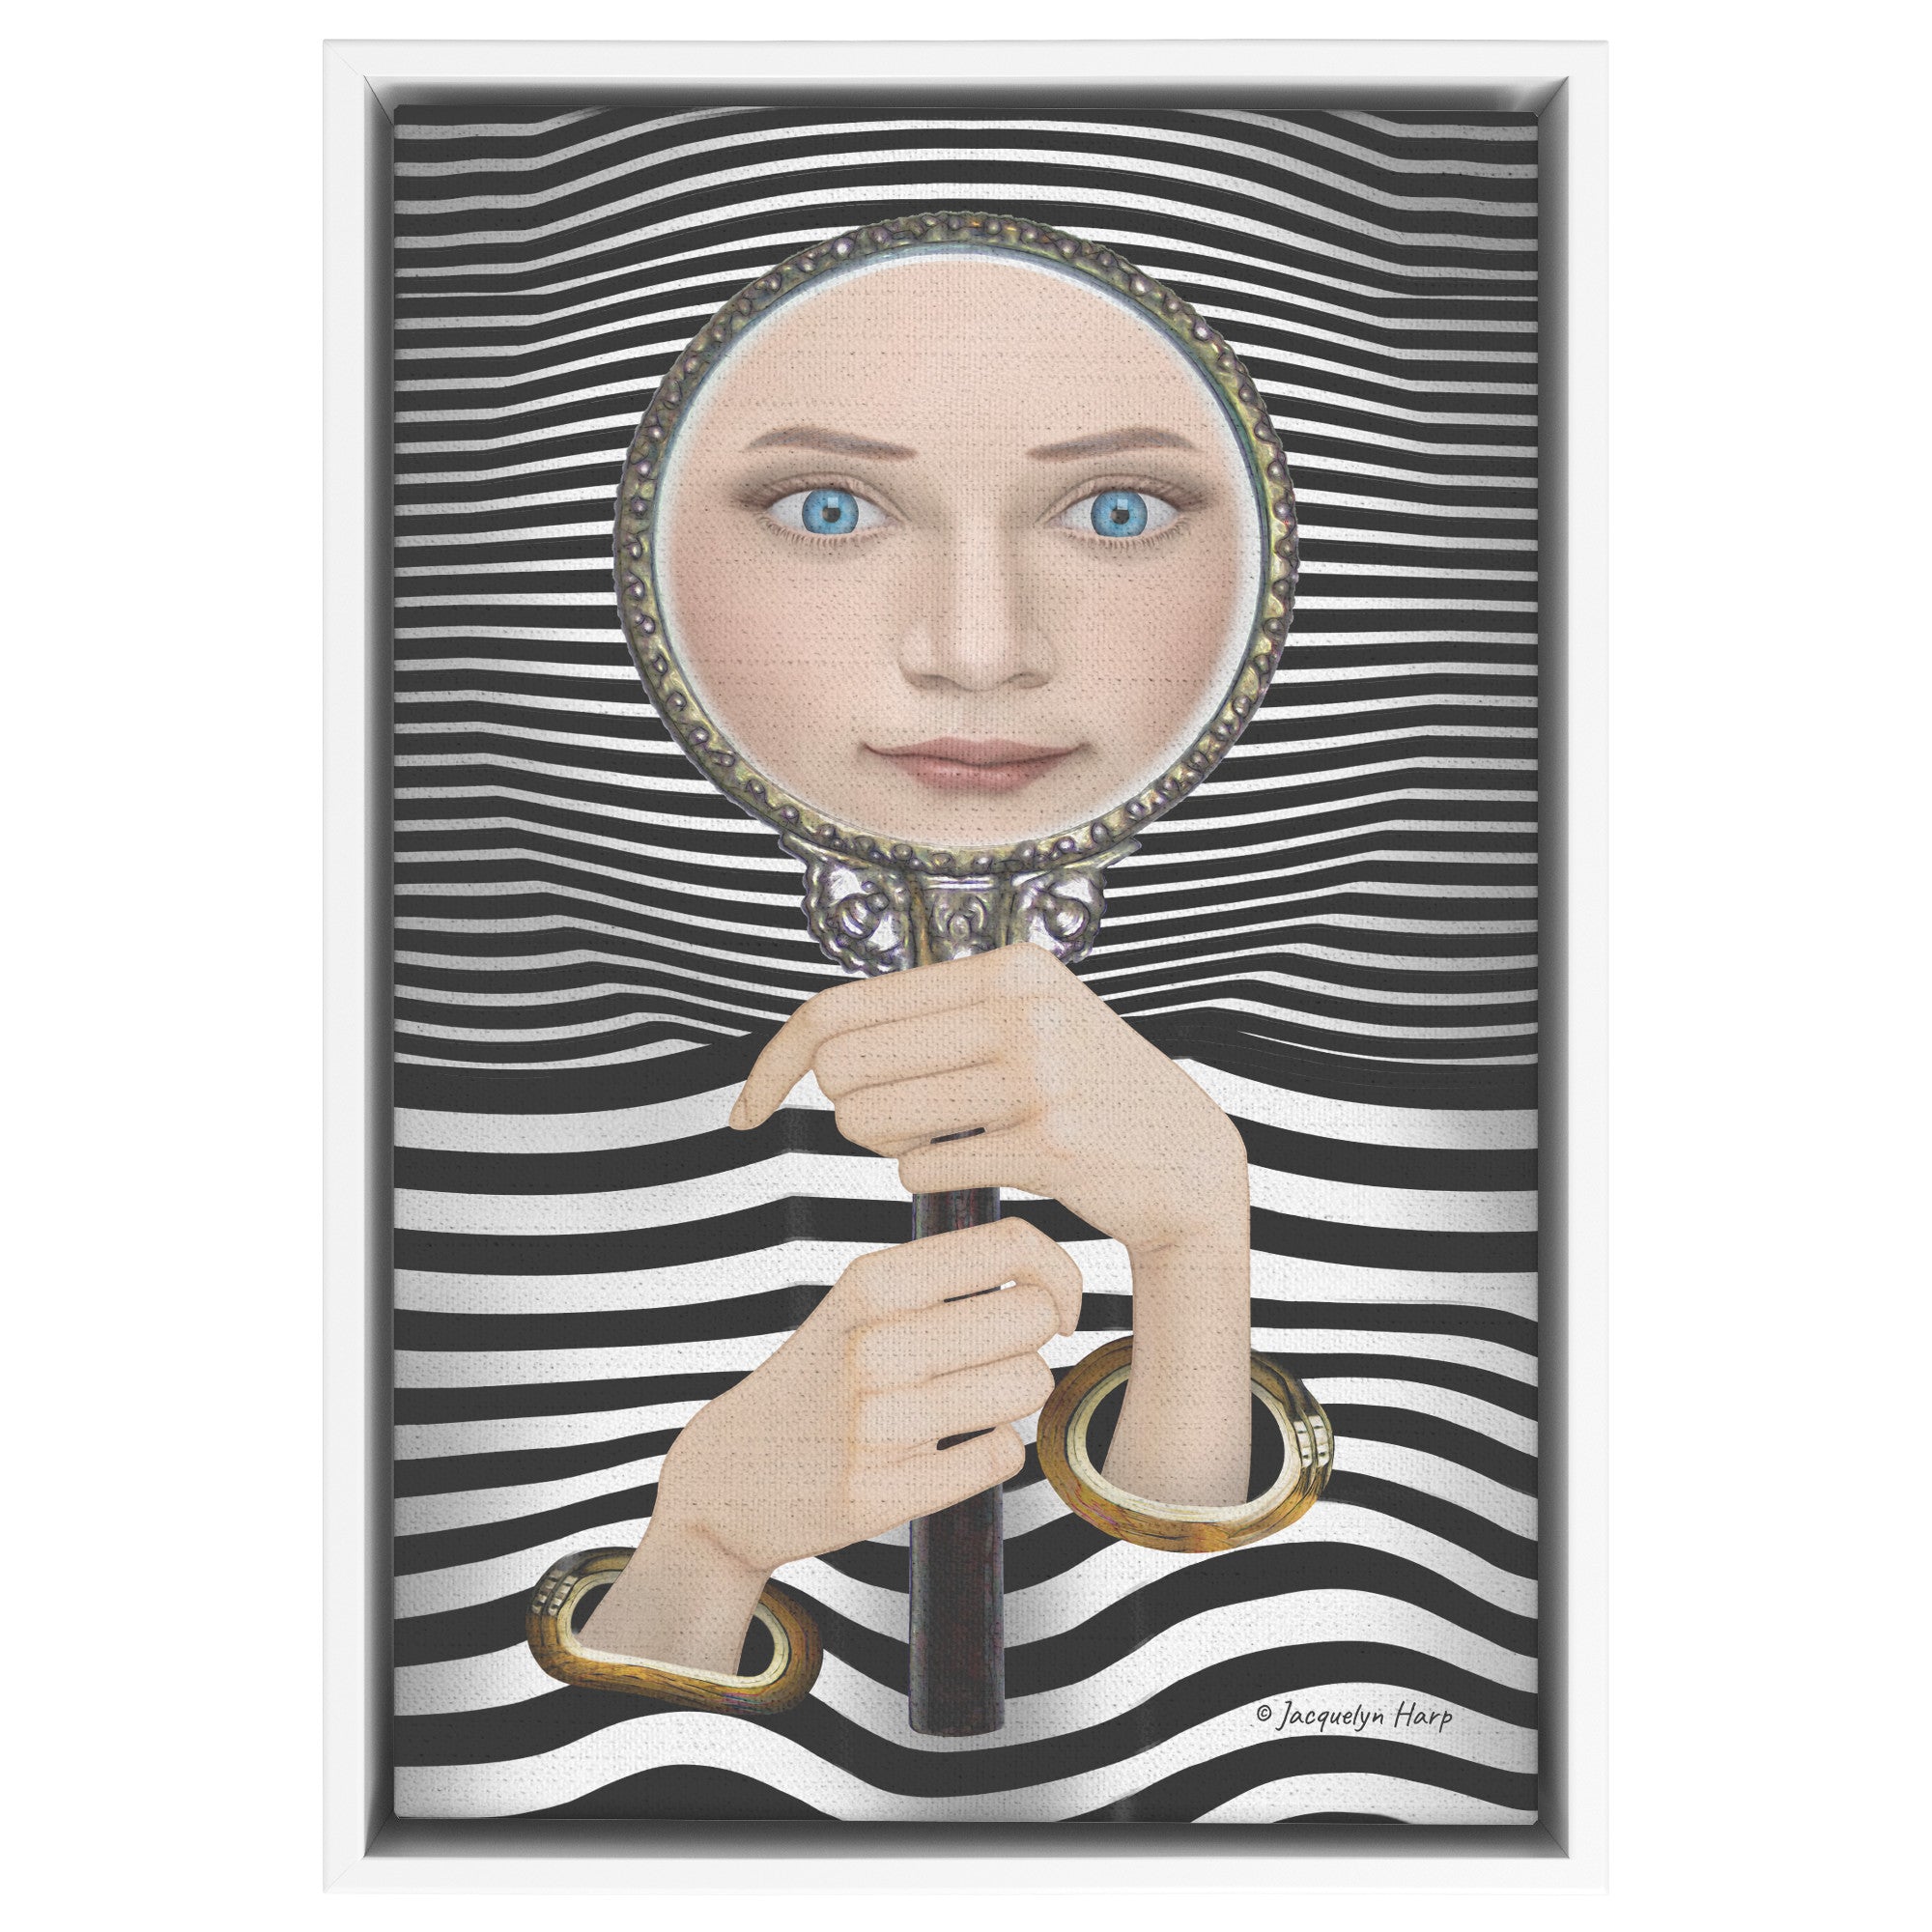 The Looking Glass - Framed Art